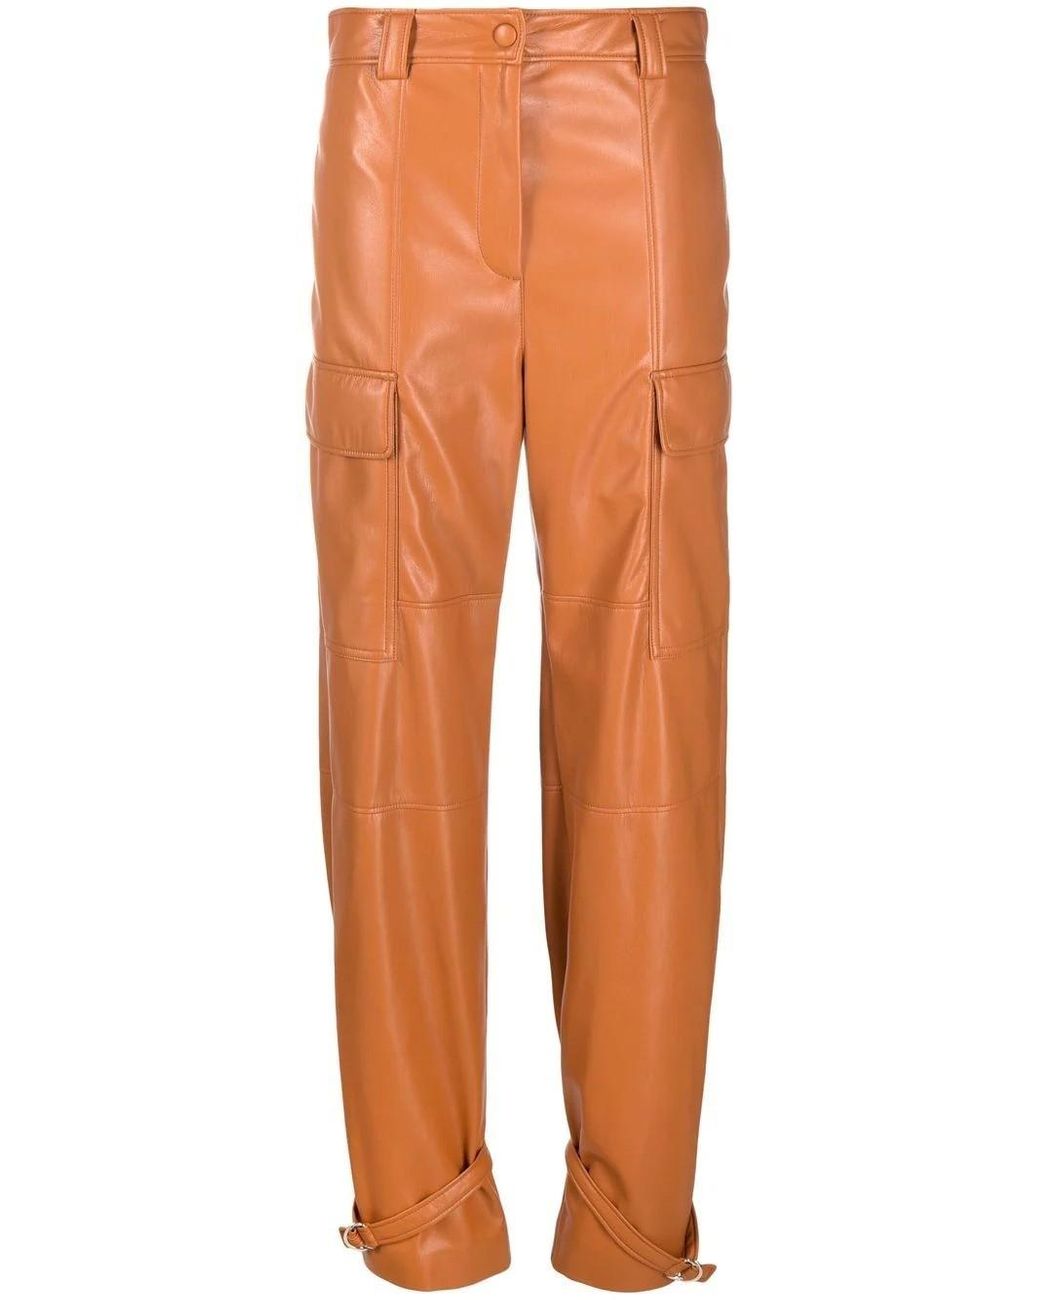 MSGM Faux-leather Cuffed Ankle Trousers in Orange - Save 32% - Lyst